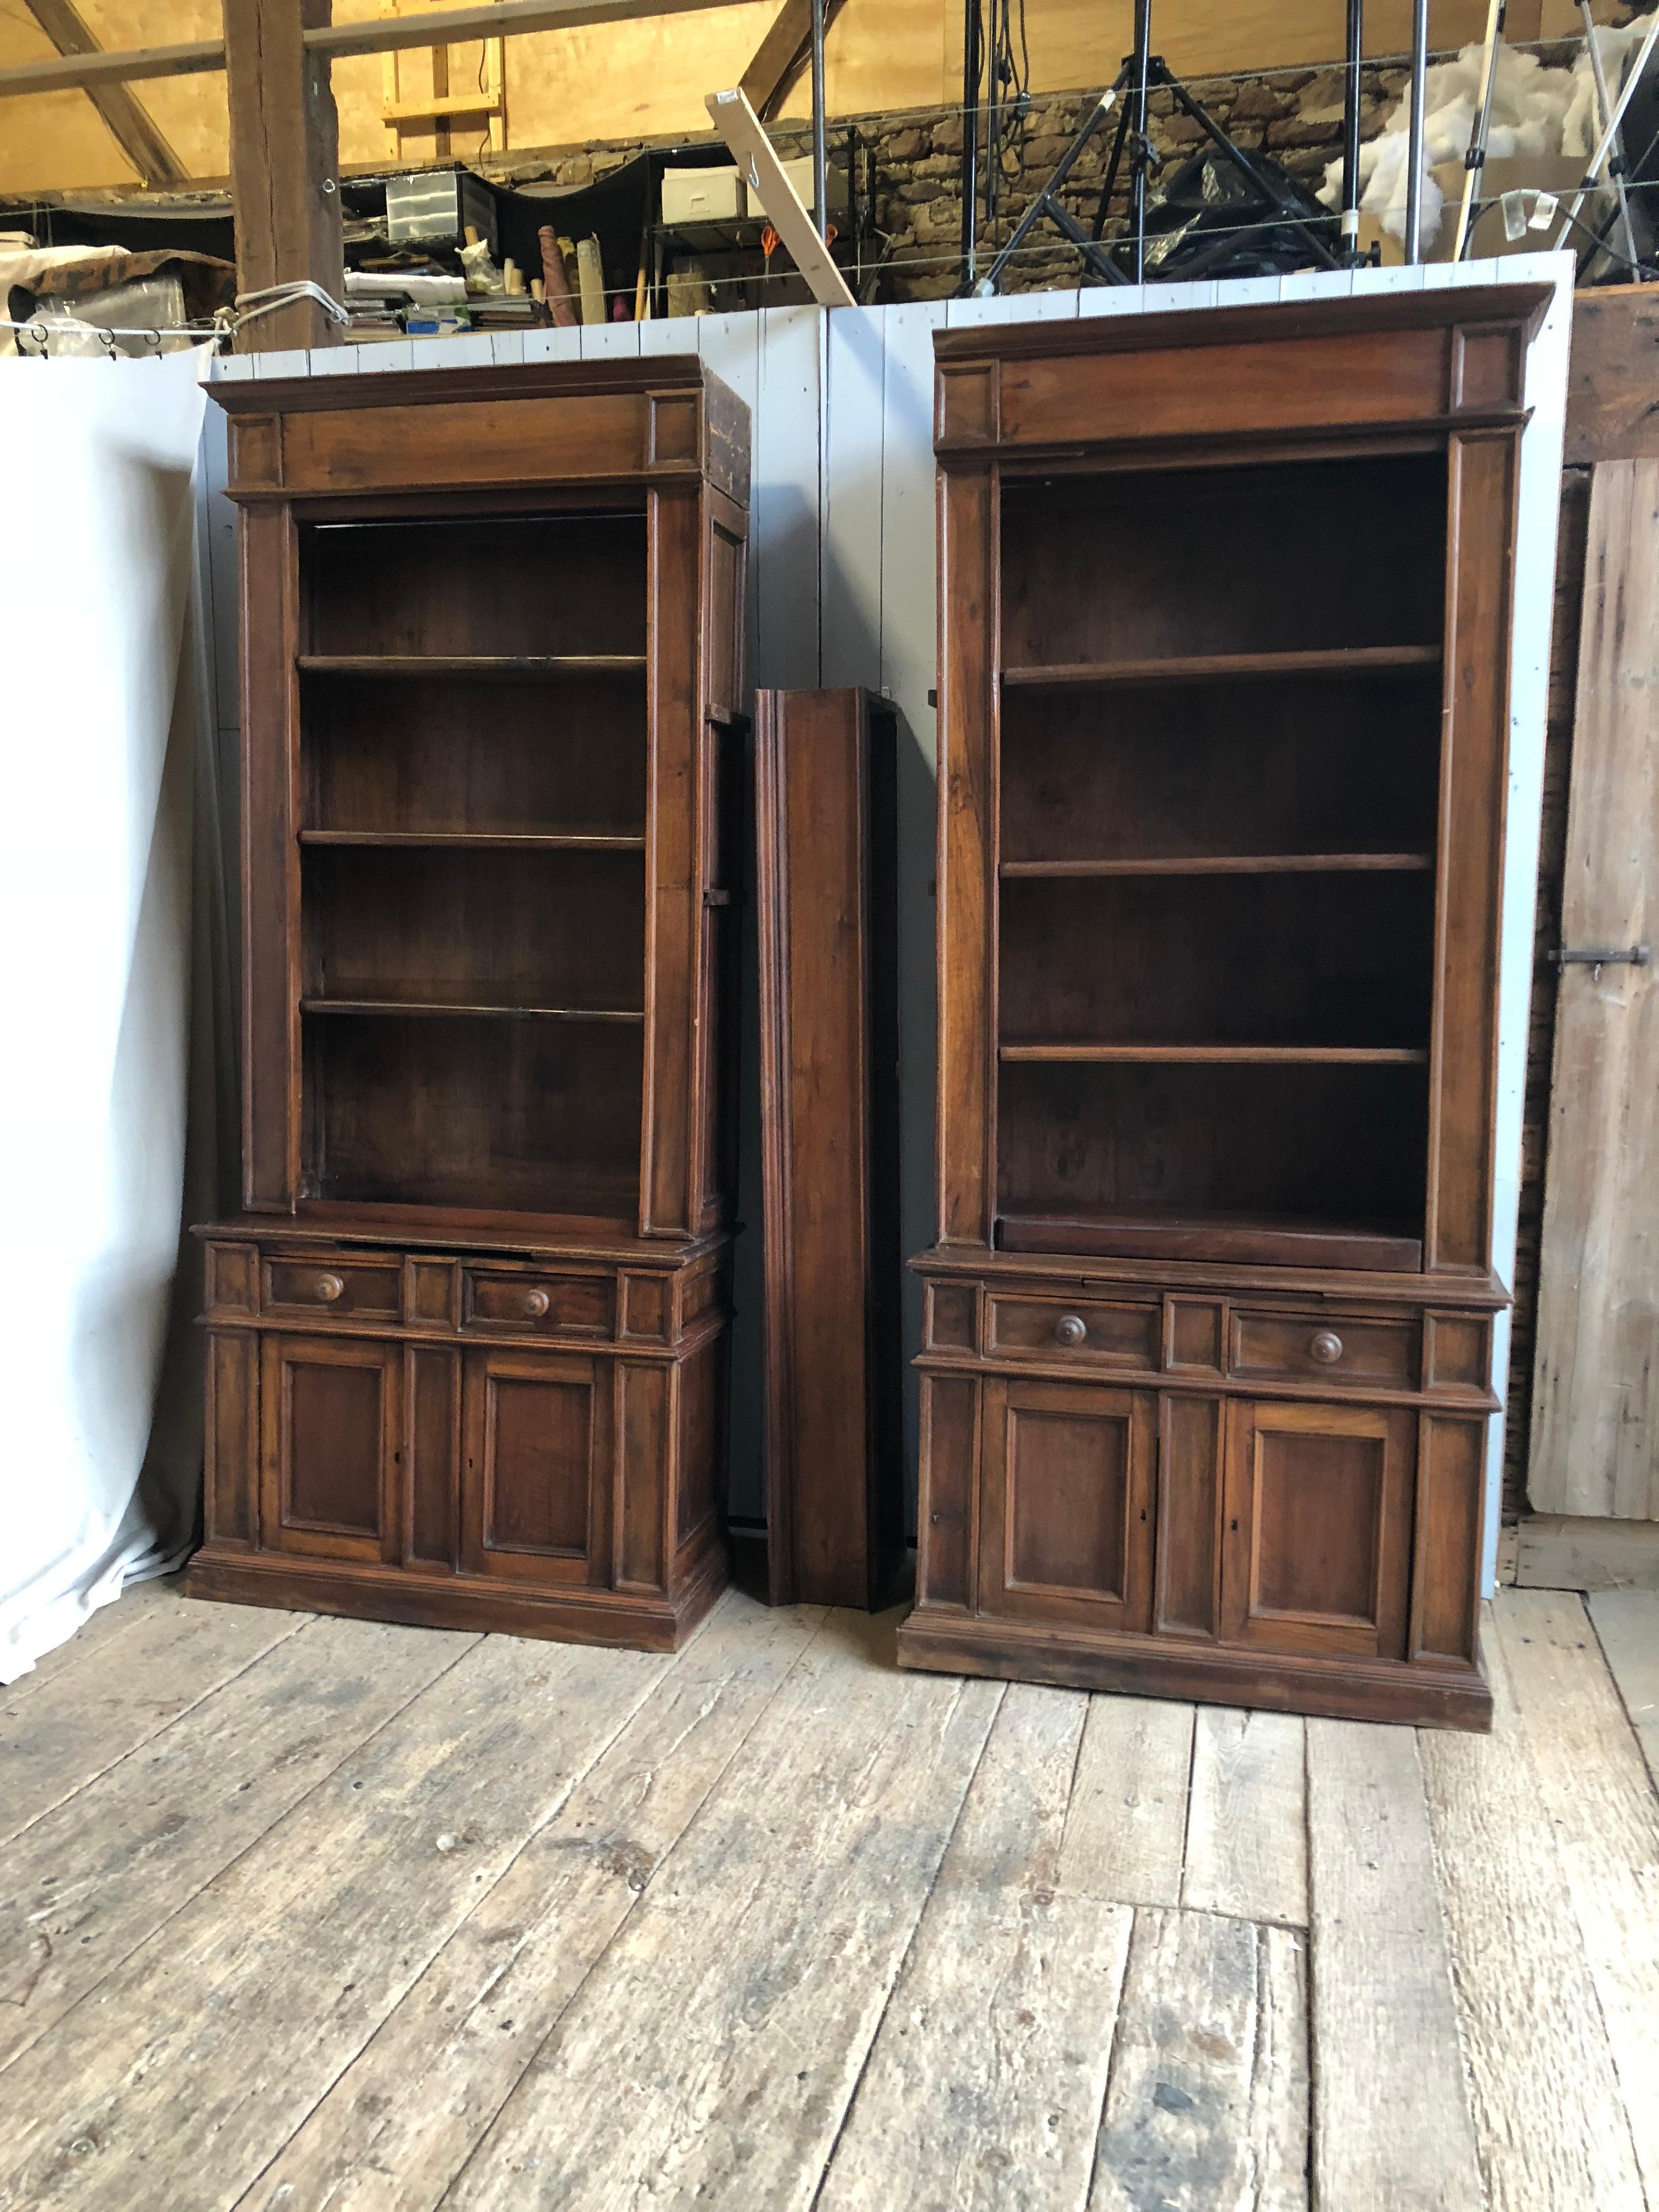 A pair of Napoleon III walnut bookcases with an upper cornice and 2 long shelves between them, mid-19th century, French. The tall upper bookcases have 3 shelves each and are above lower 2-door cabinets with 2 drawers above. Great store display or as